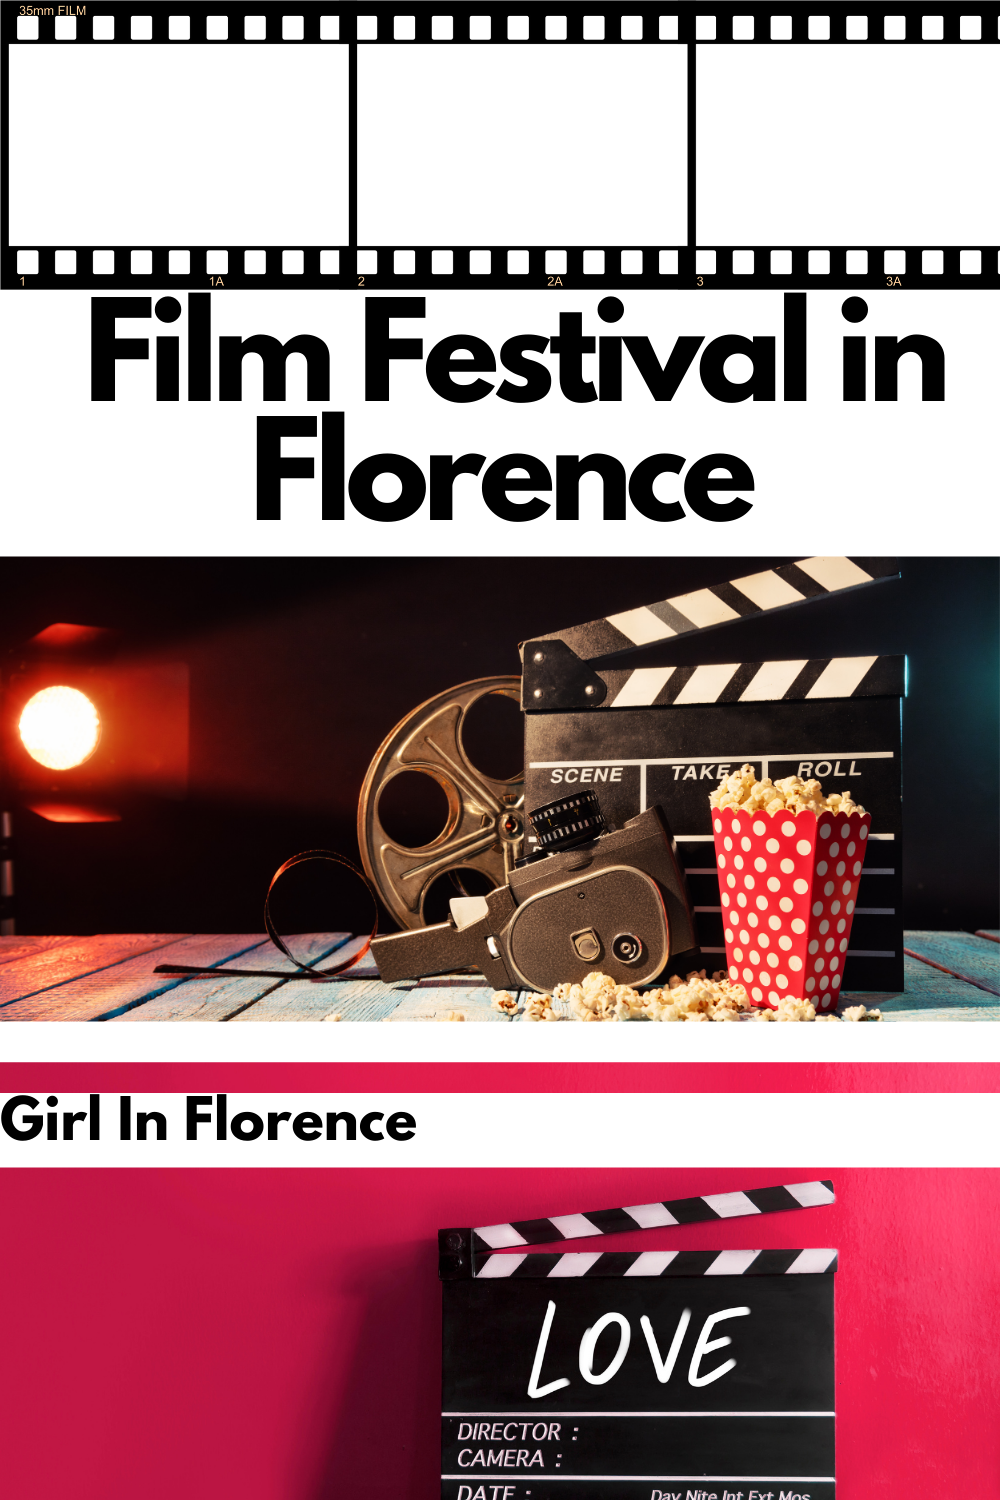 Film Festival Fever in Florence this spring, yes! Girl in Florence